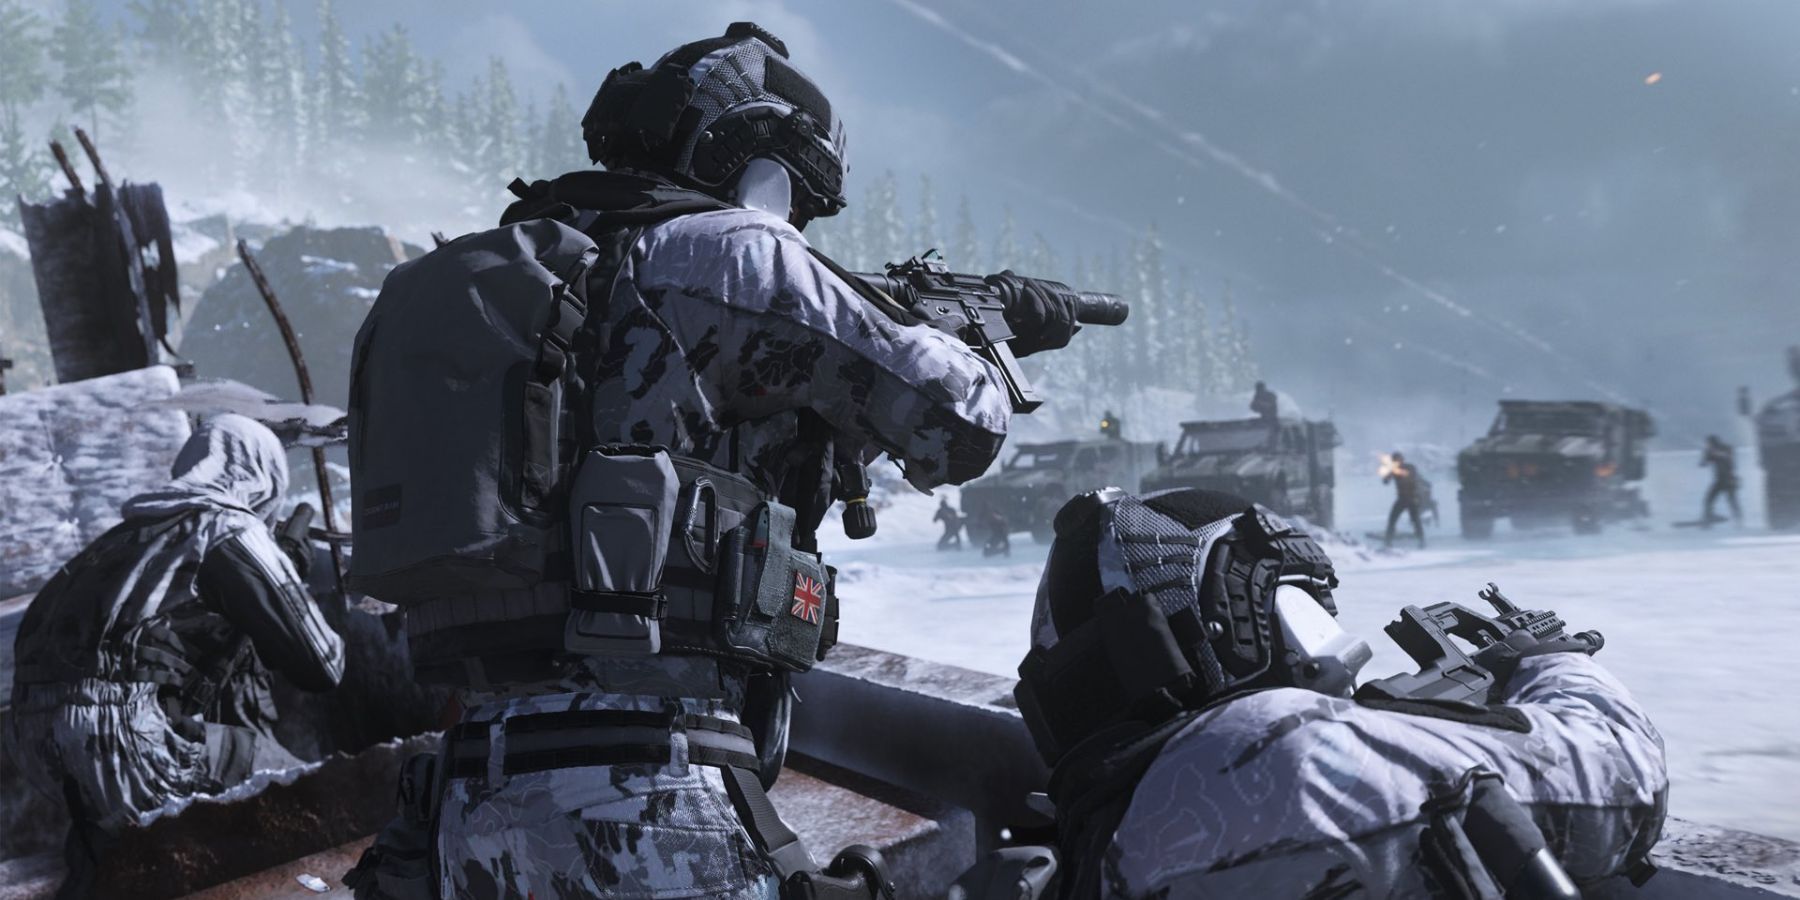 Call of Duty Modern Warfare 3 campaign 2023 - setting, characters, and more